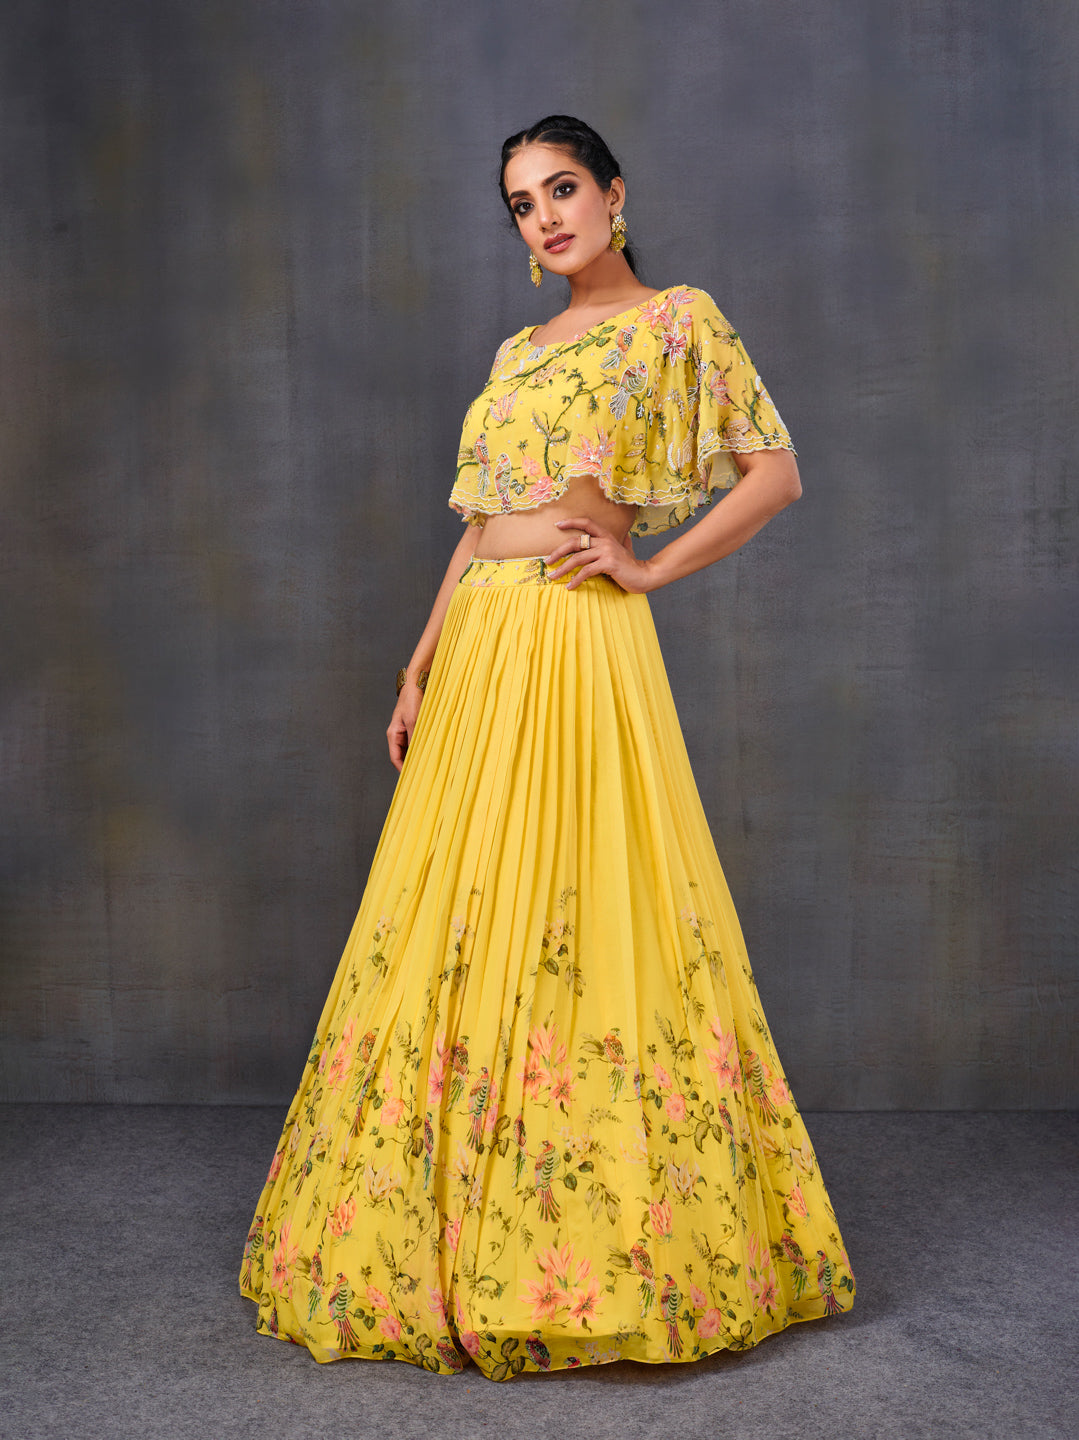 Buy AORI Indian Women Designer Thread Sequence Work Crop Top Yellow Lehenga  With Fully-Stitched Blouse, Ready To Wear Lehenga Choli (PC_183_Yellow) at  Amazon.in